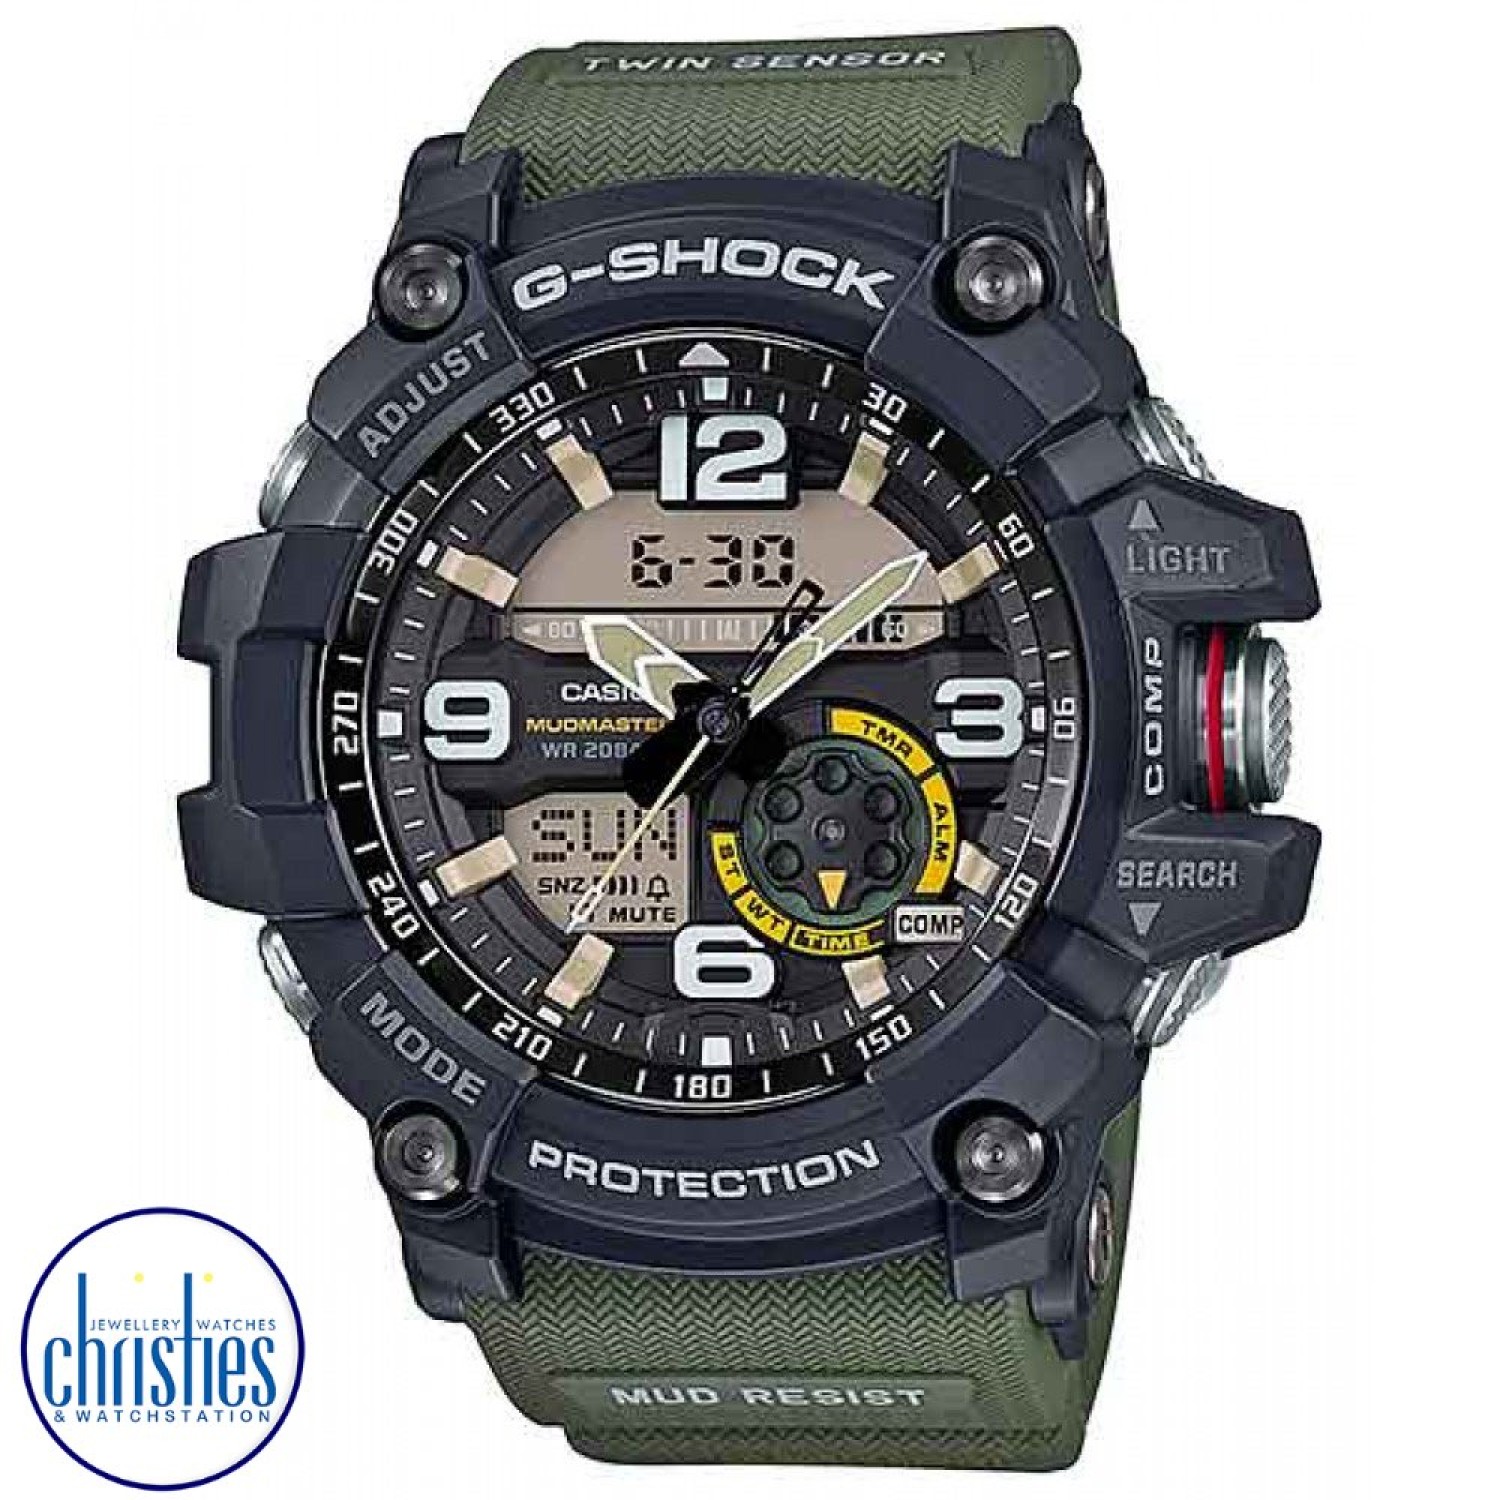 GG1000-1A3 G-Shock MUDMASTER Twin Sensor. This is the latest new addition to the MASTER OF G MUDMASTER Series, now available instore and online at Christies, was created especially for this whose work takes it into areas where piles of rubble, dirt, and d